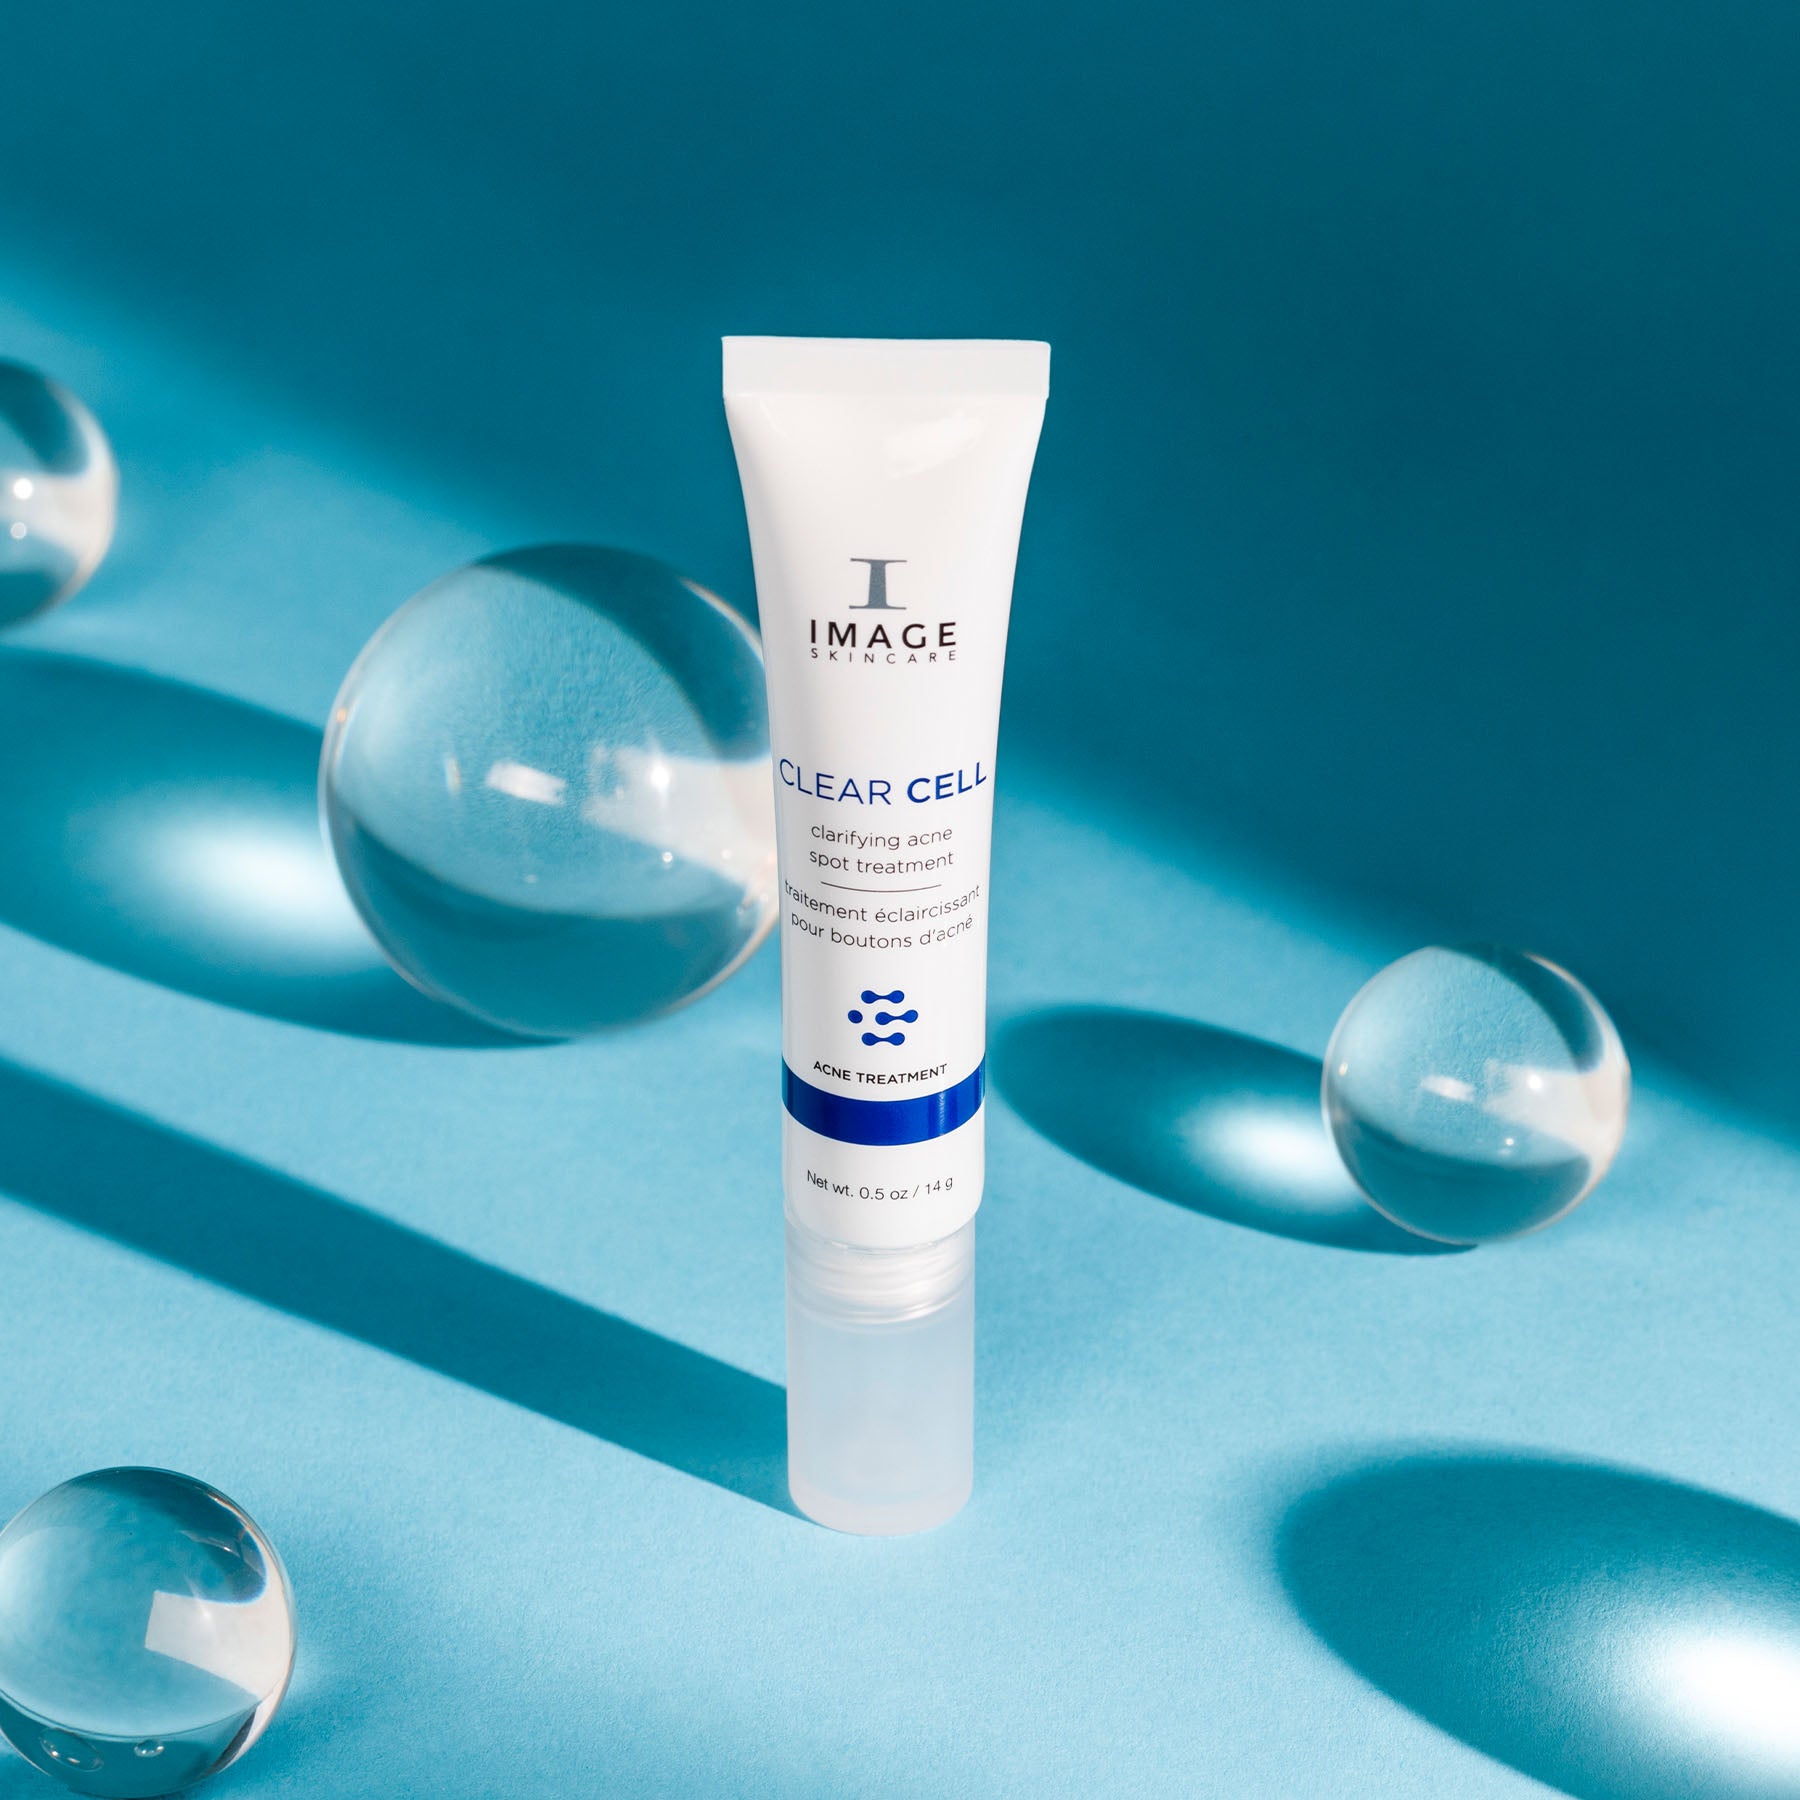 CLEAR CELL clarifying acne spot treatment tube with blue background